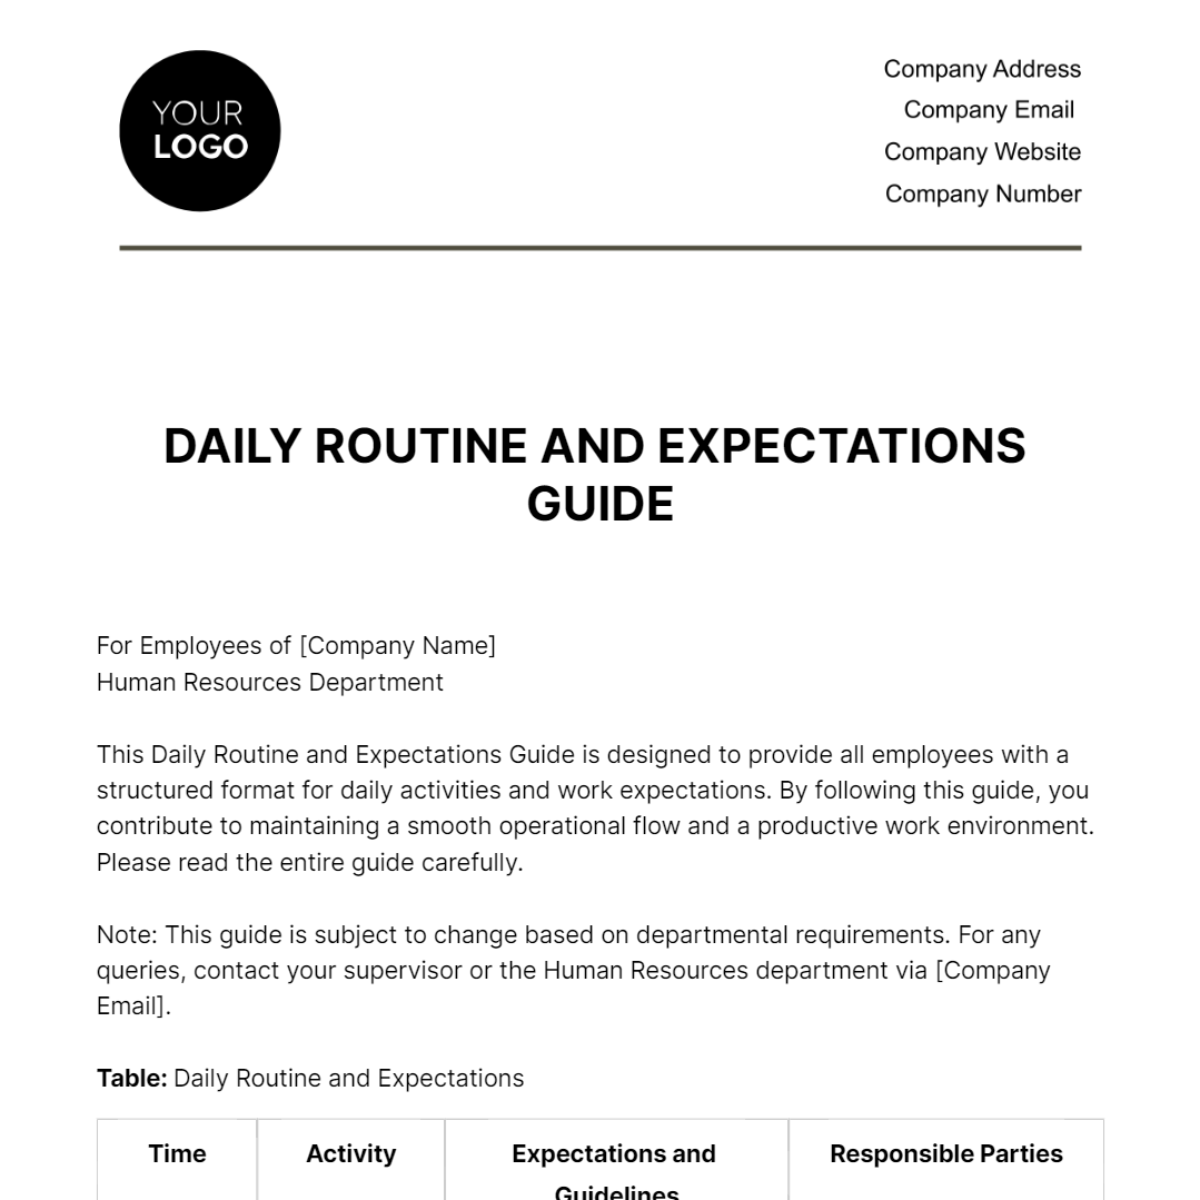 Free Daily Routine and Expectations Guide HR Template